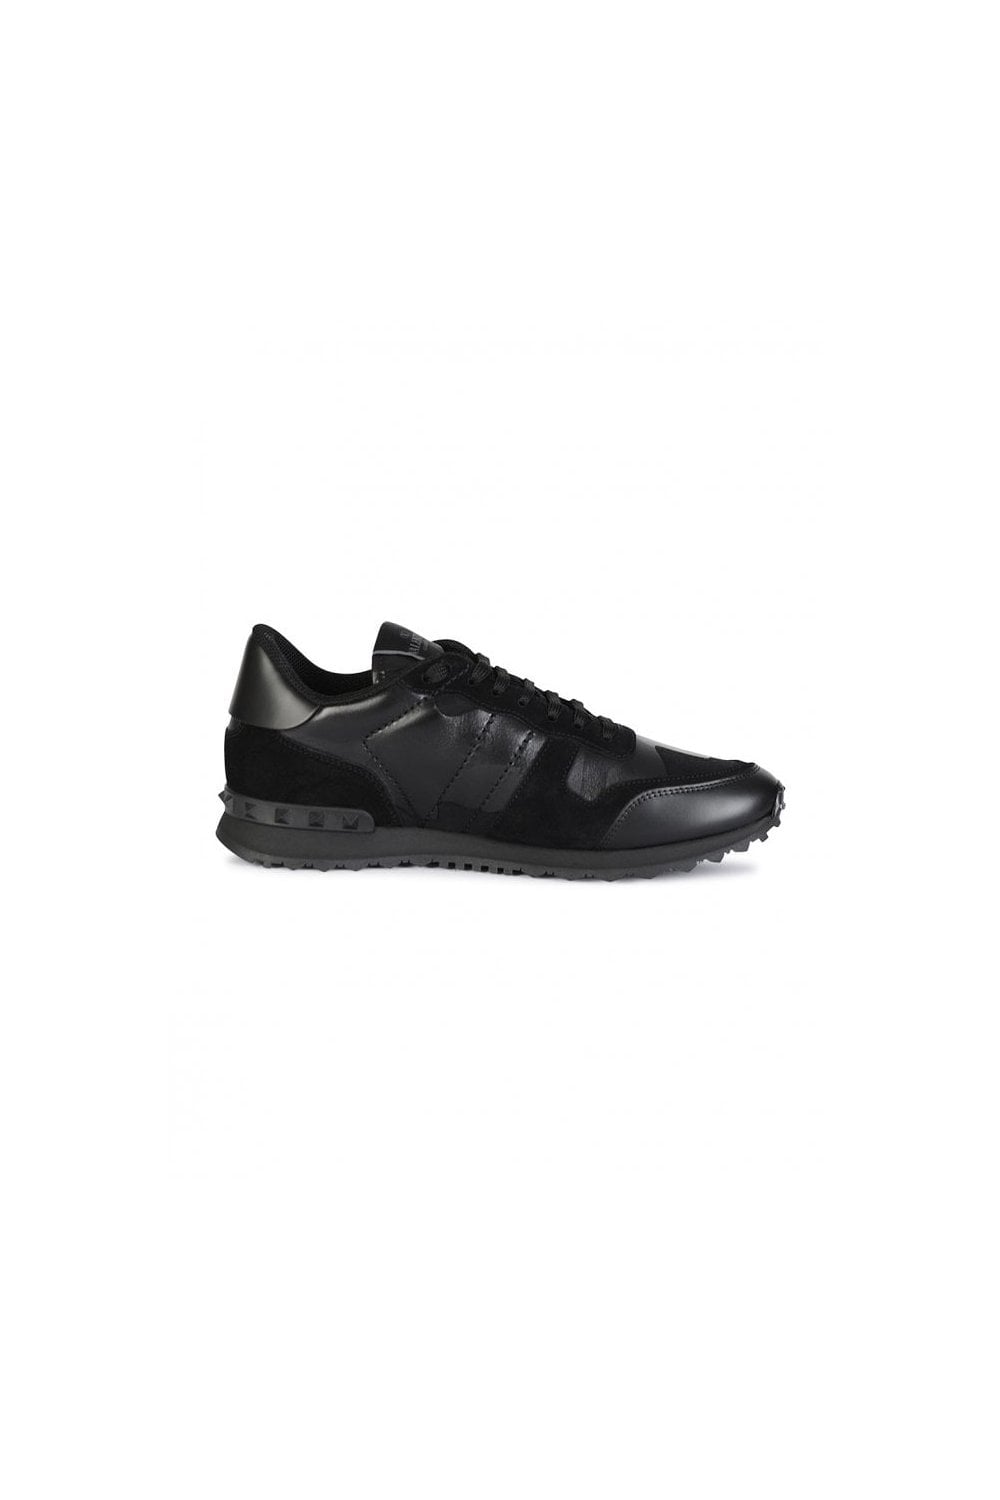 Valentino Cameo Rockrunner Trainers Black